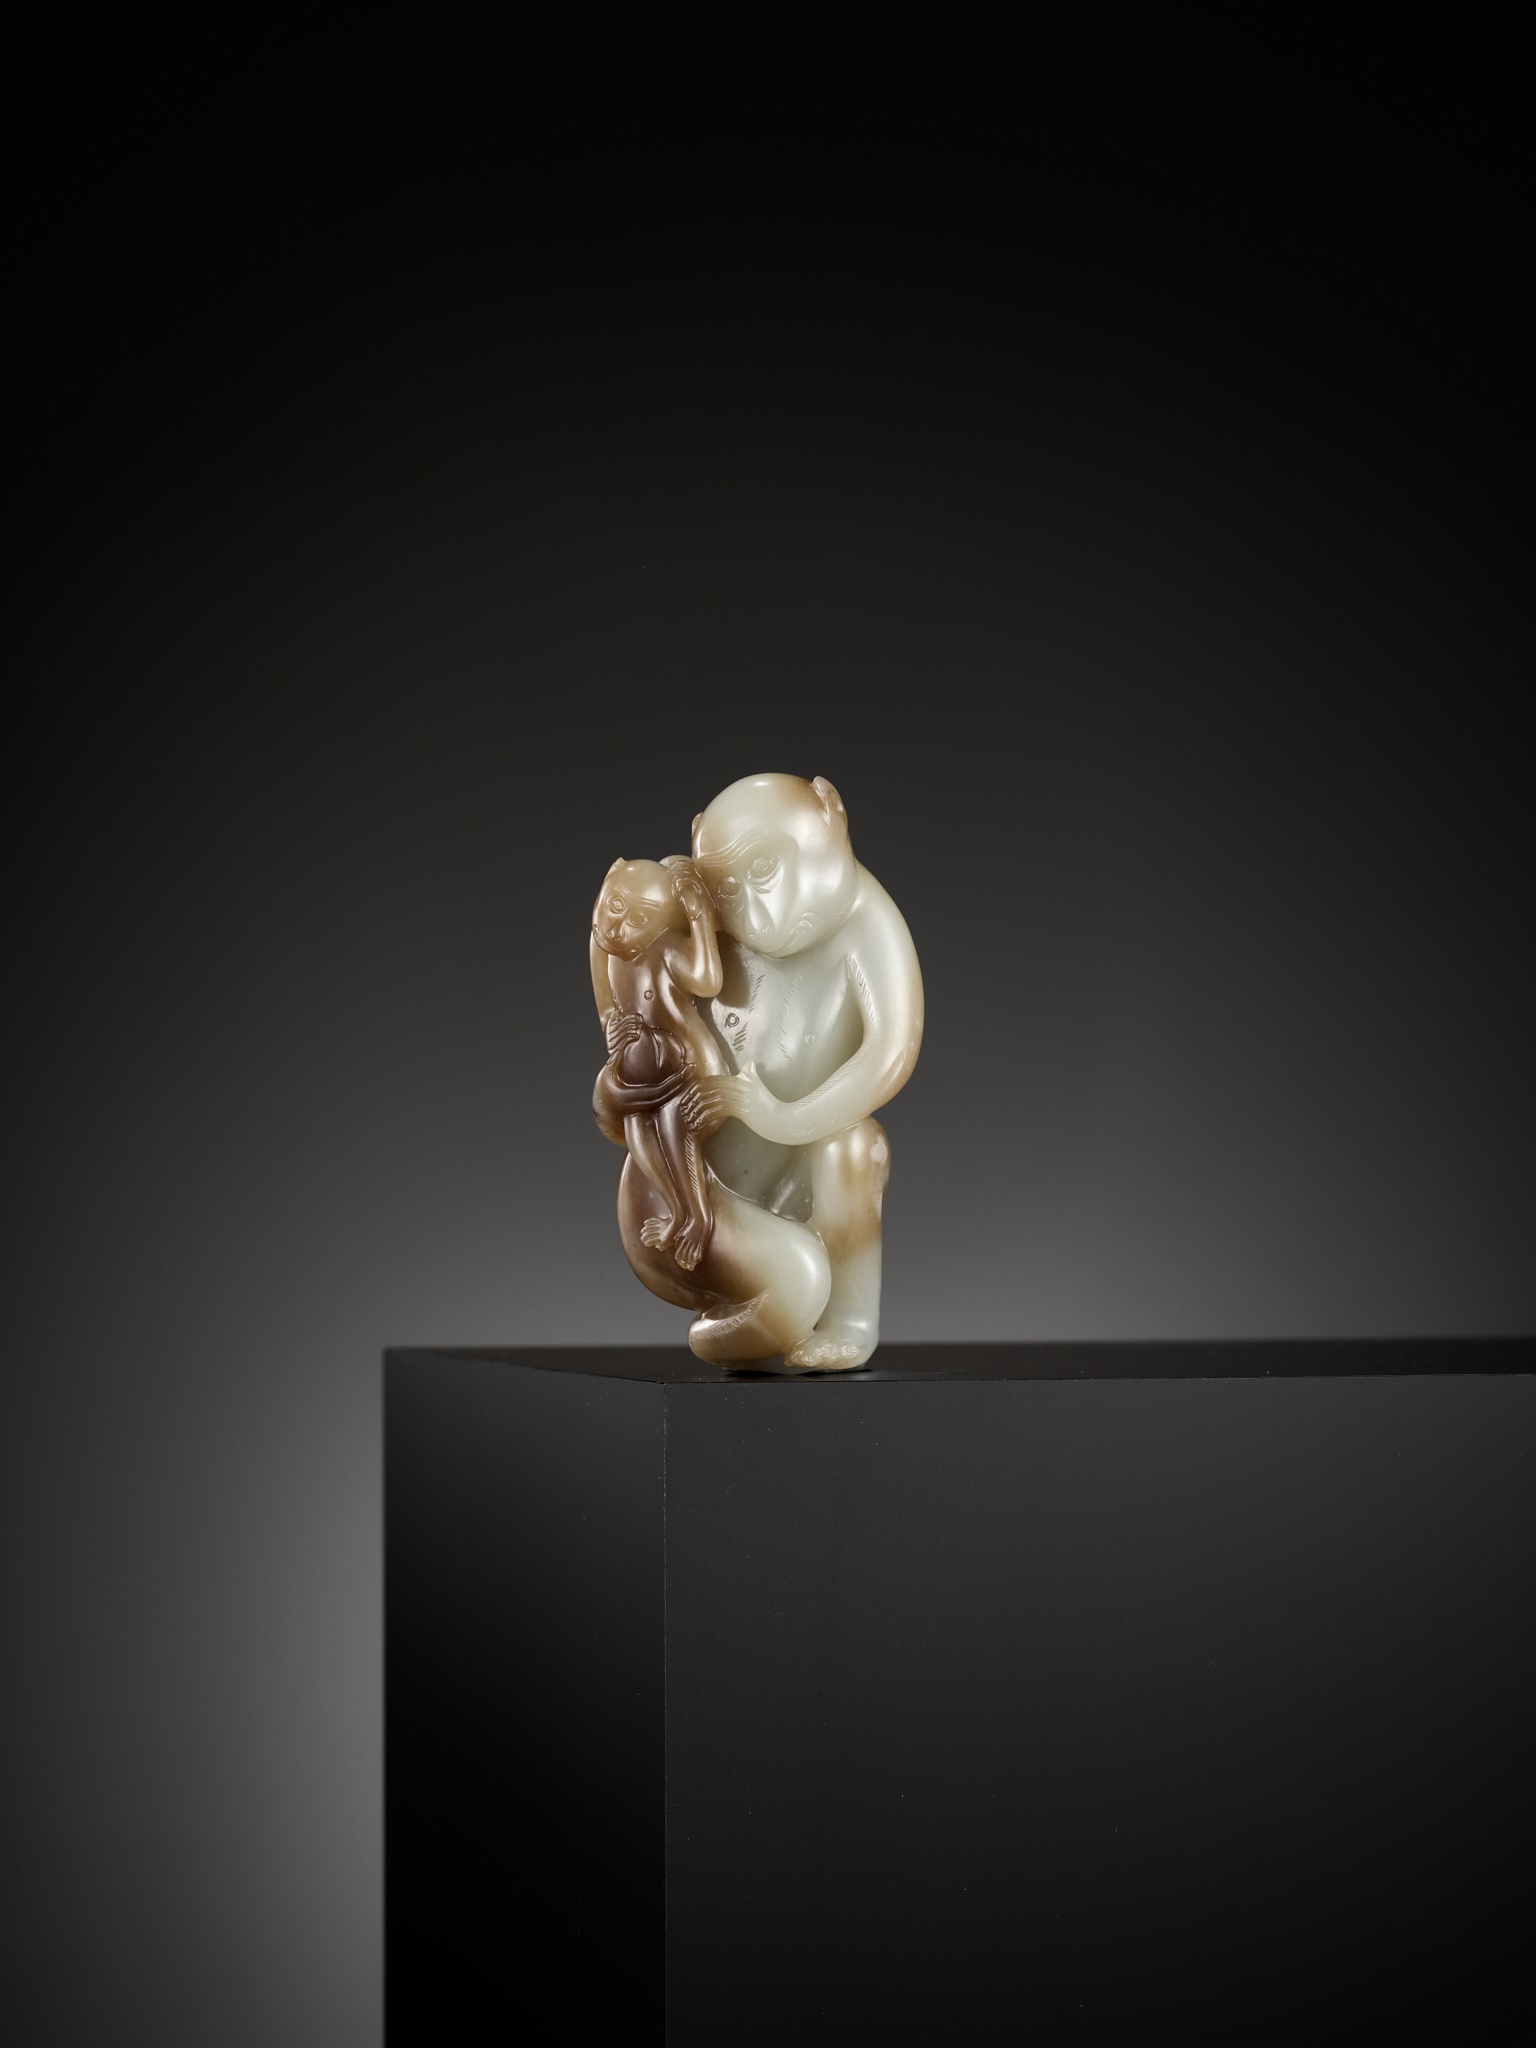 A FINE PALE CELADON AND CHESTNUT BROWN JADE 'MONKEYS AND PEACH' GROUP, 18TH CENTURY - Image 11 of 21